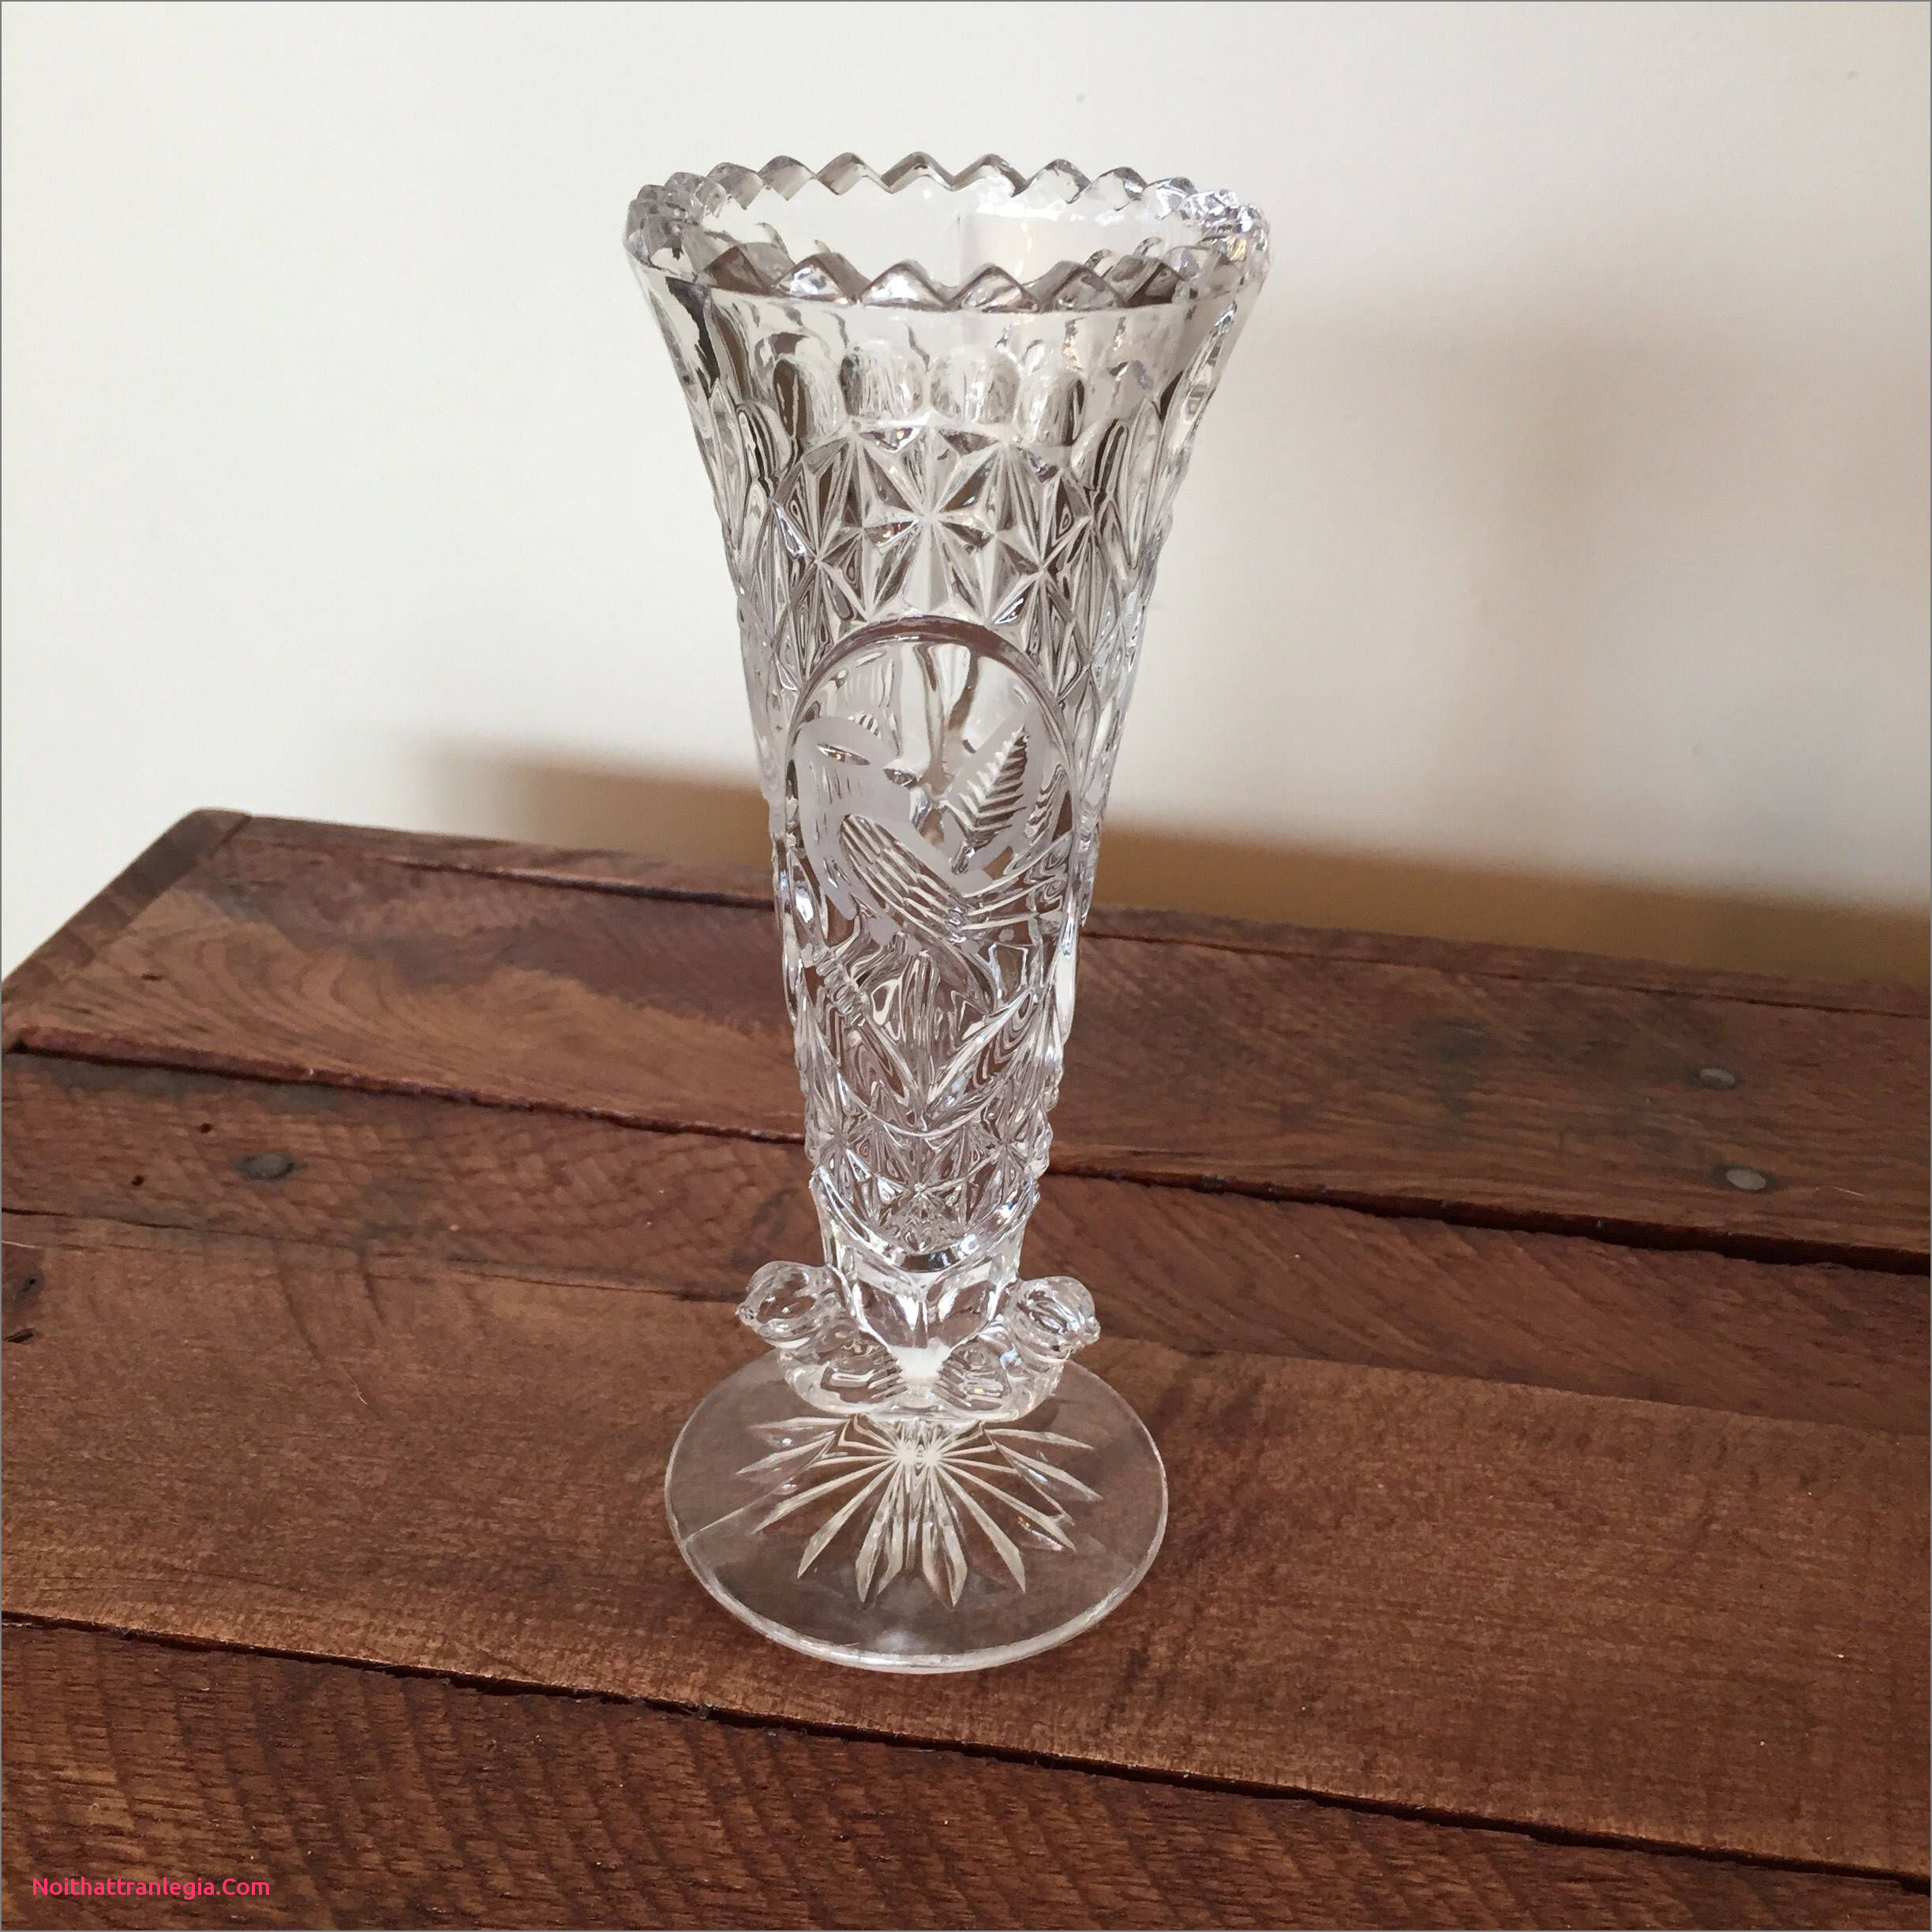 28 Famous Sterling Silver Bud Vase 2024 free download sterling silver bud vase of 20 cut glass antique vase noithattranlegia vases design with regard to vintage cut glass bird vase etched glass vase three glass birds perched on vase crystal bir